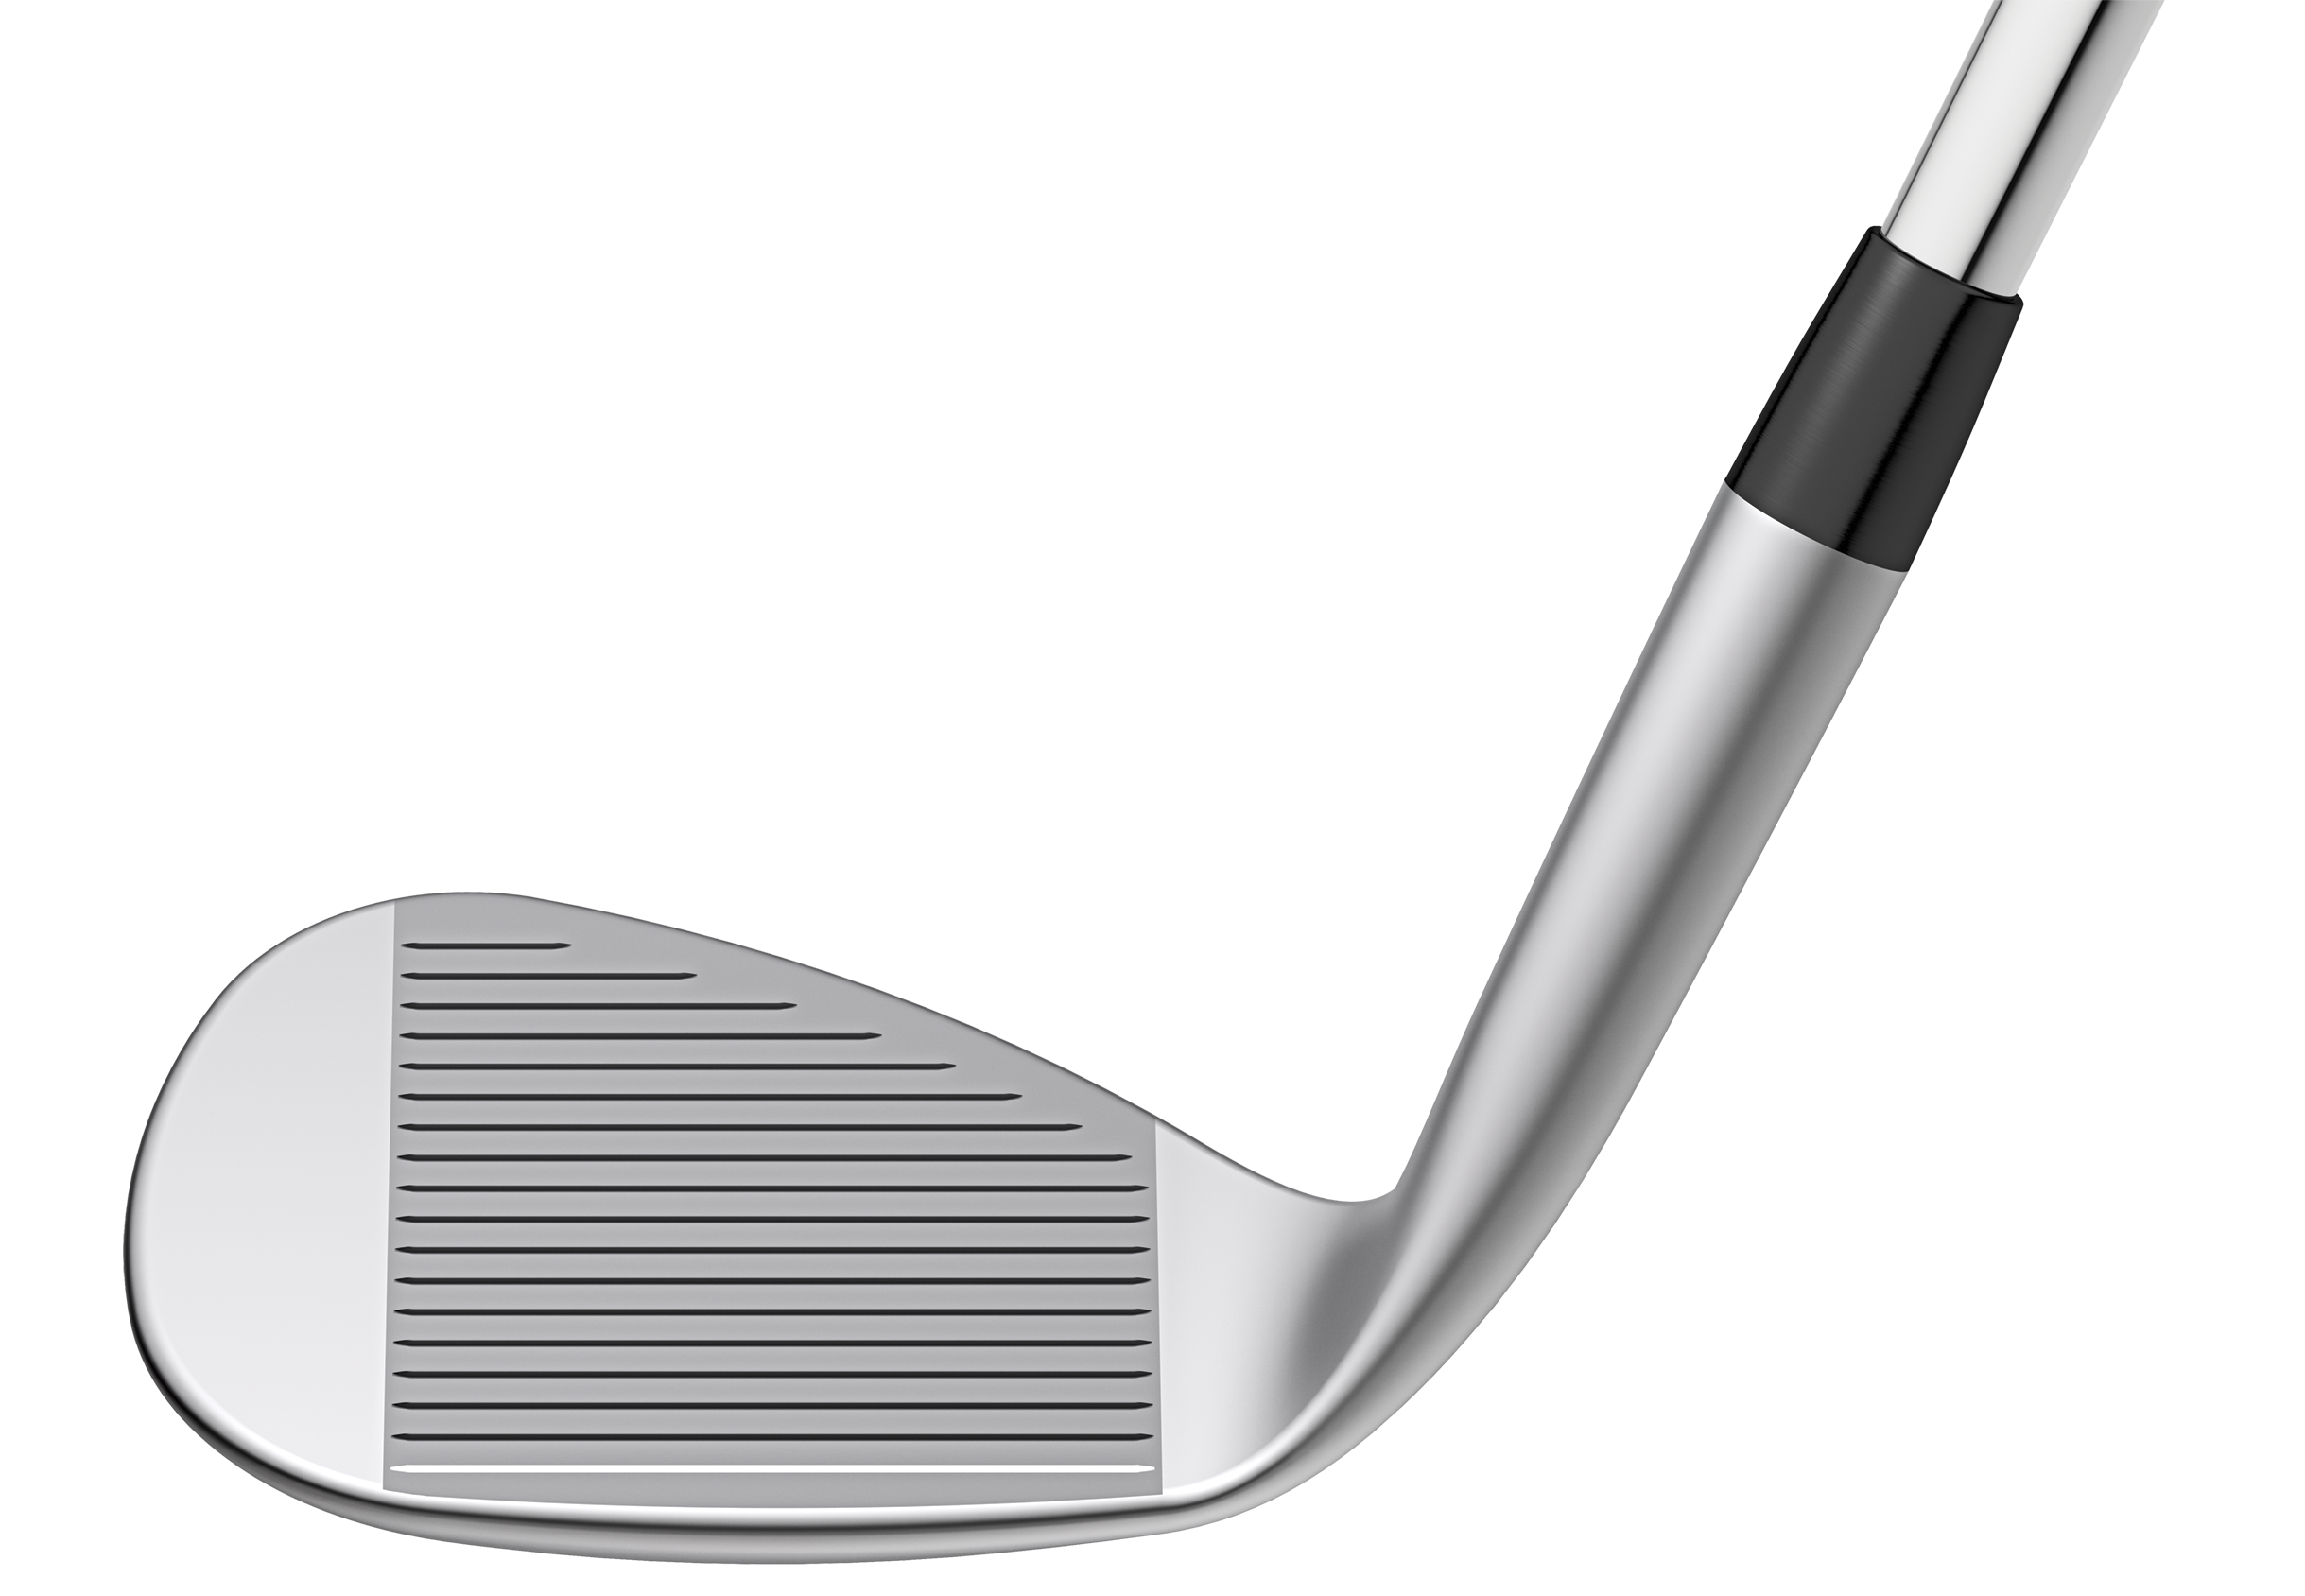 Ping launches Glide 2.0 wedge